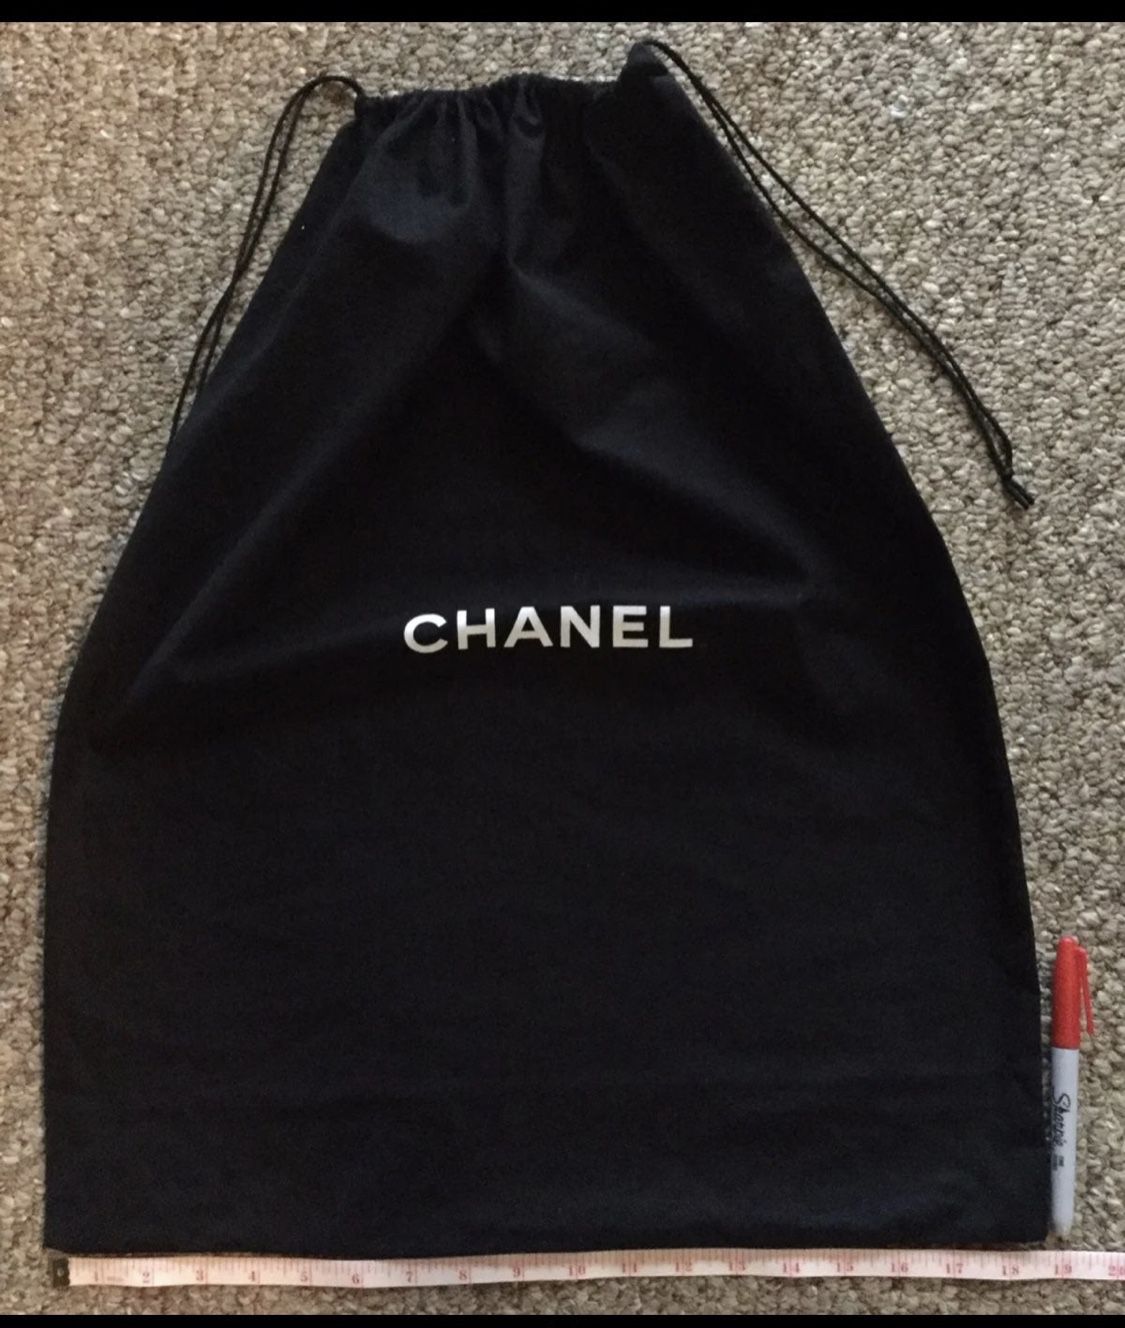 1 Chanel big dust bag (18.5x23) for Sale in Algonquin, IL - OfferUp